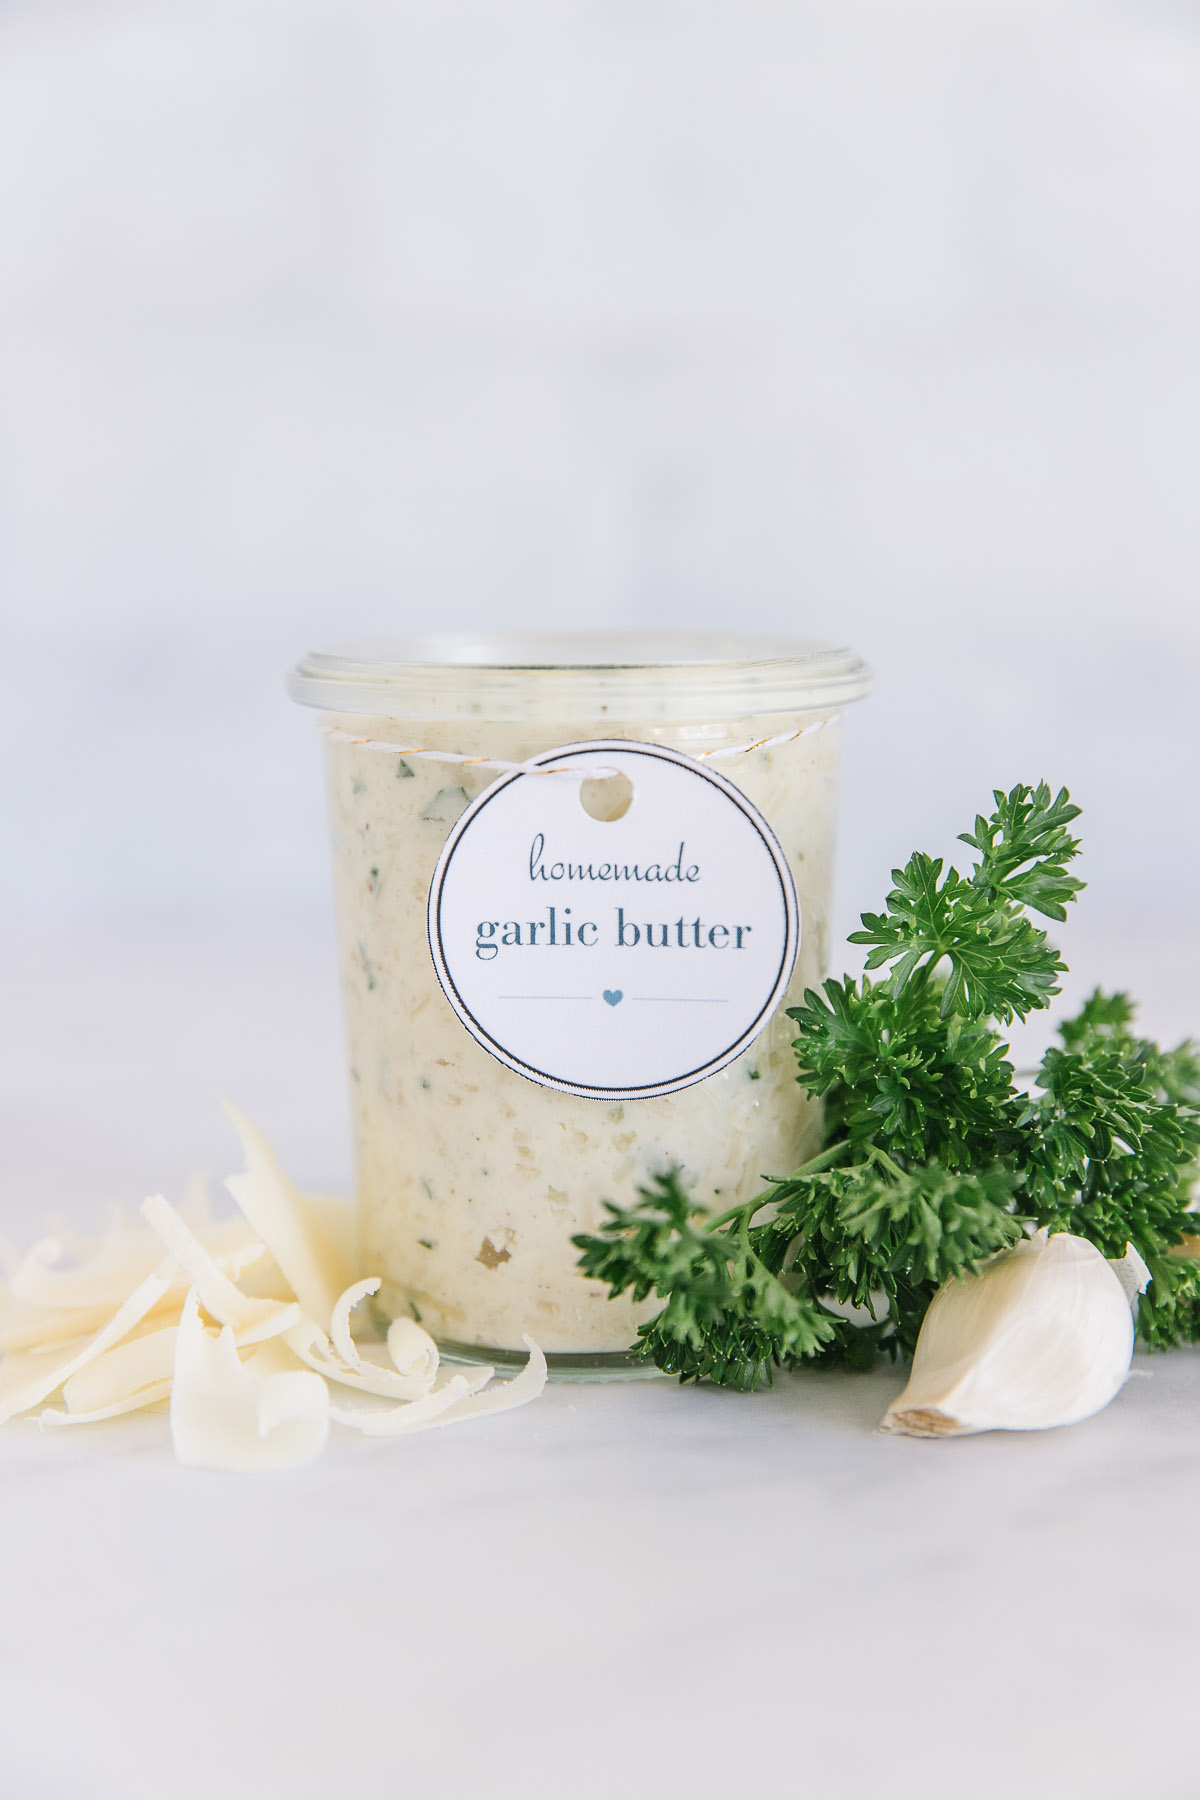 A container of homemade garlic butter with label with garlic and cheese and herbs on the side.